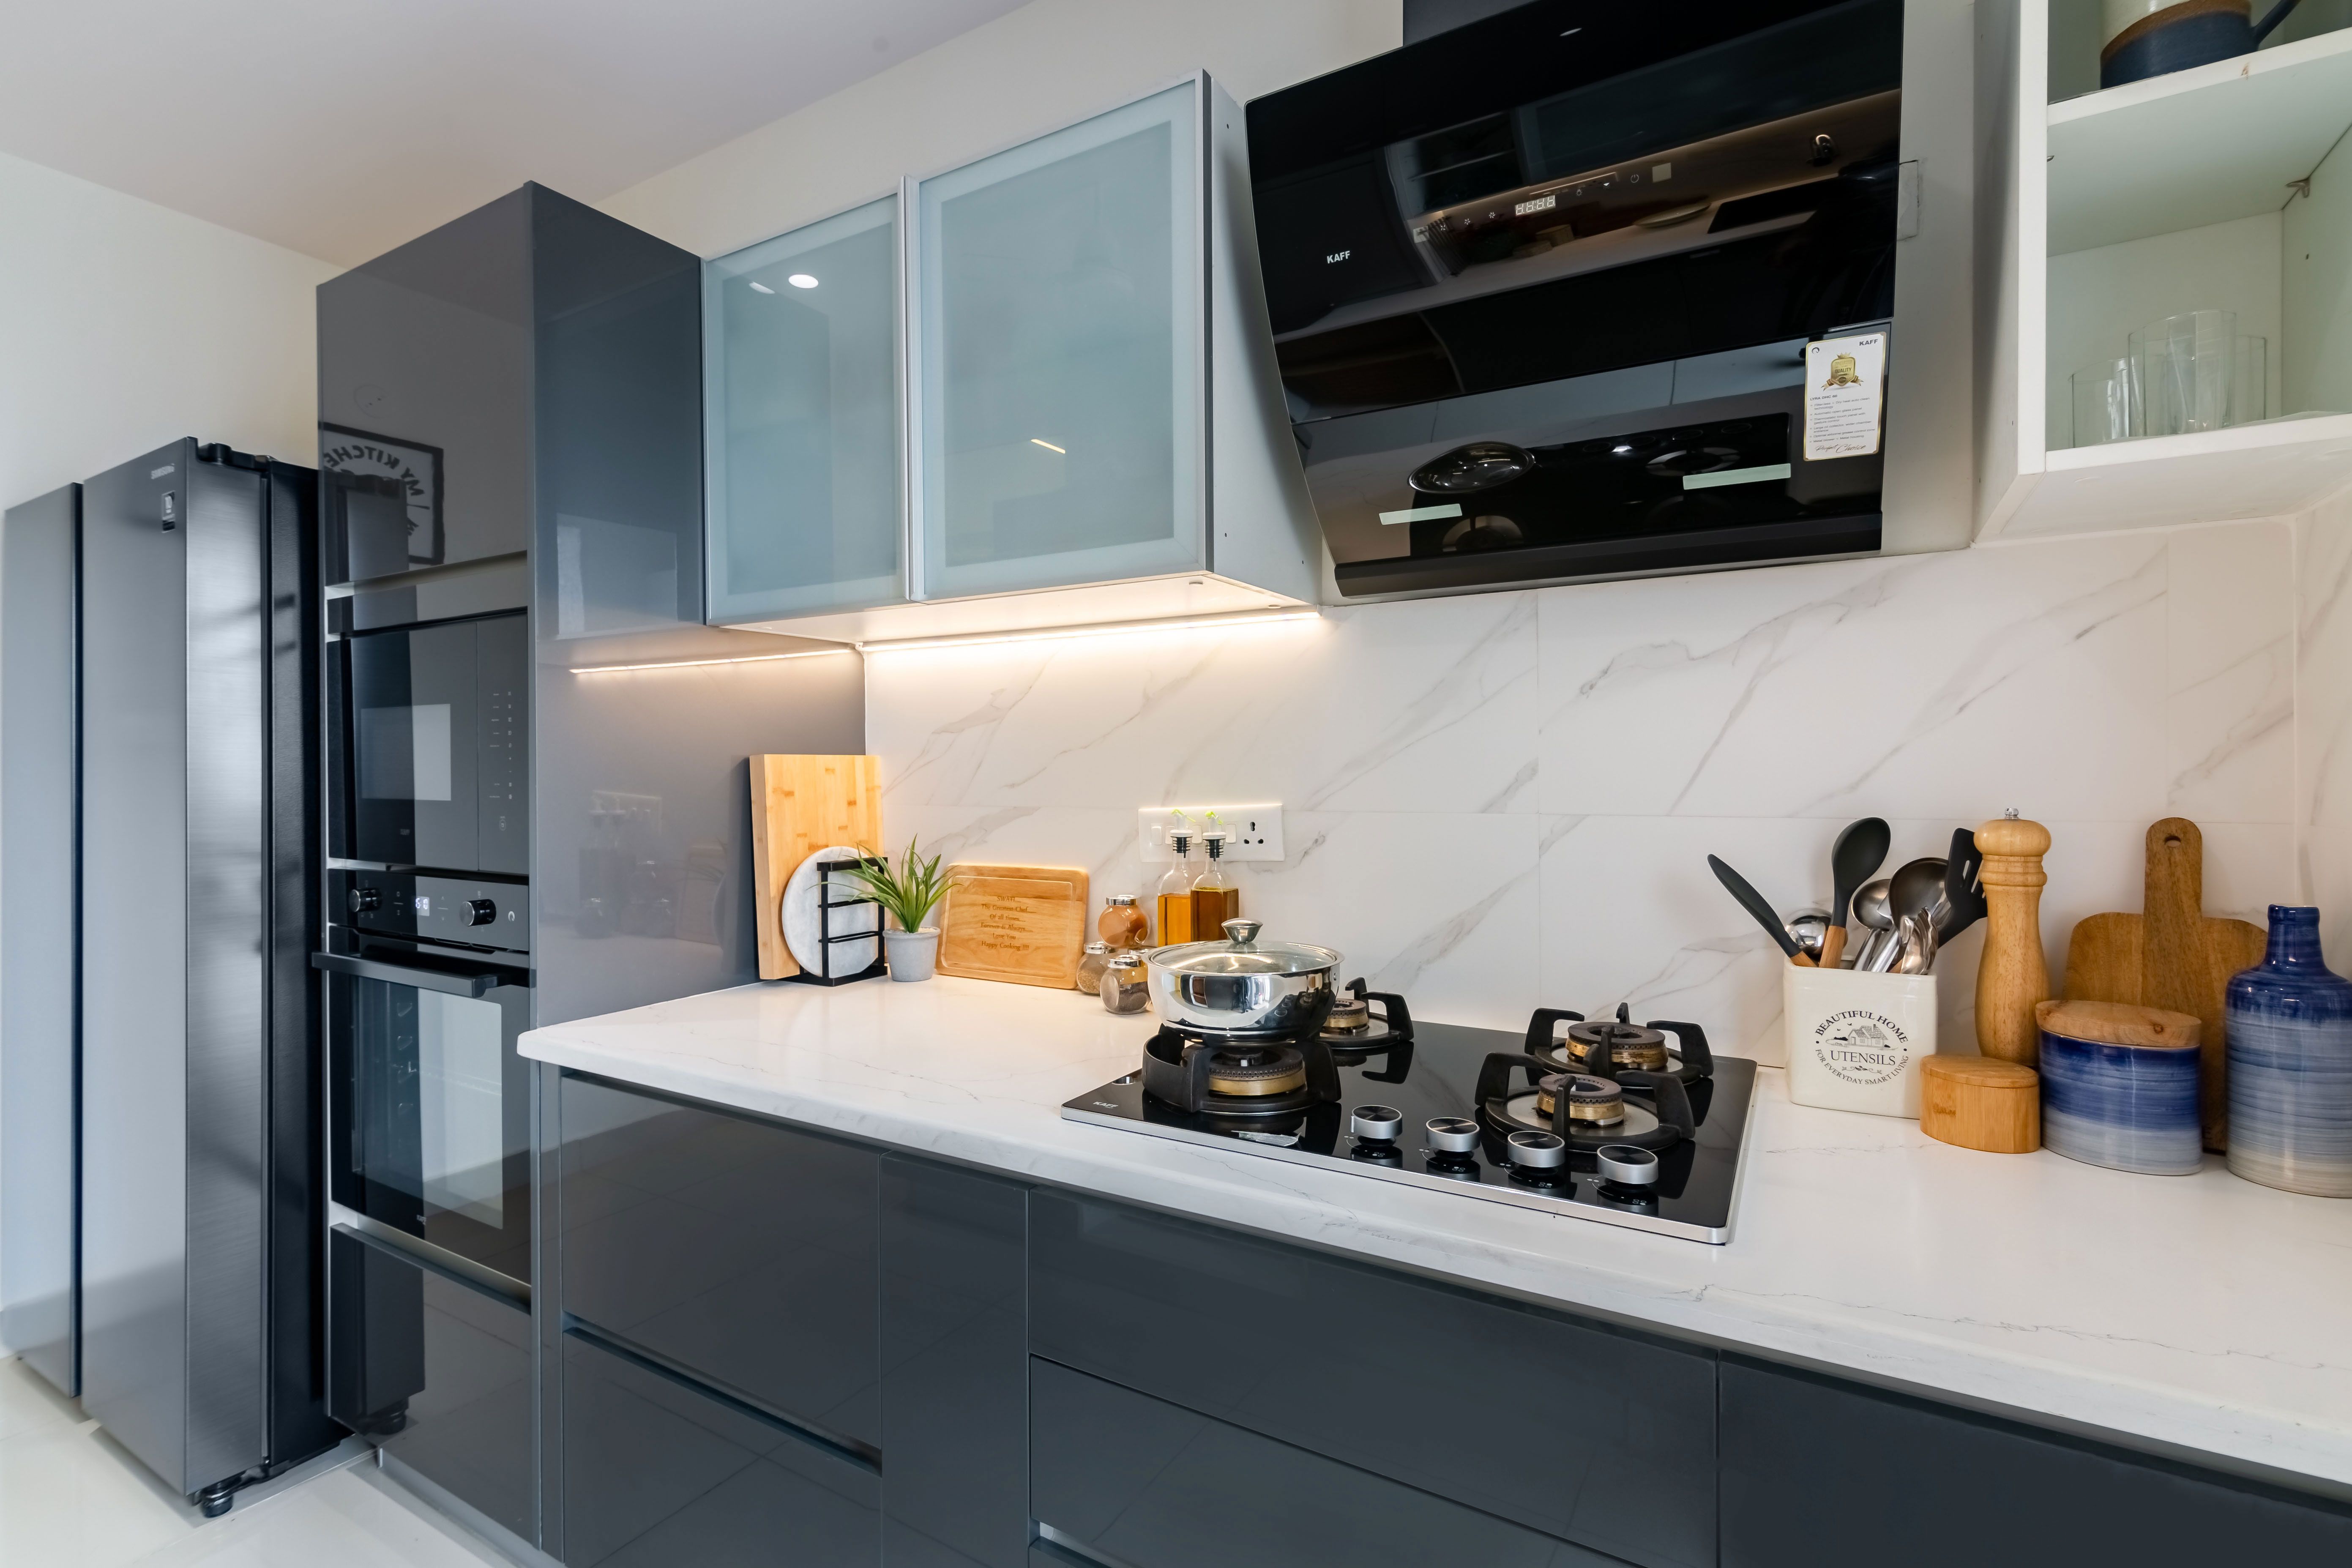 Modern Parallel Kitchen Design With A Glossy Finish